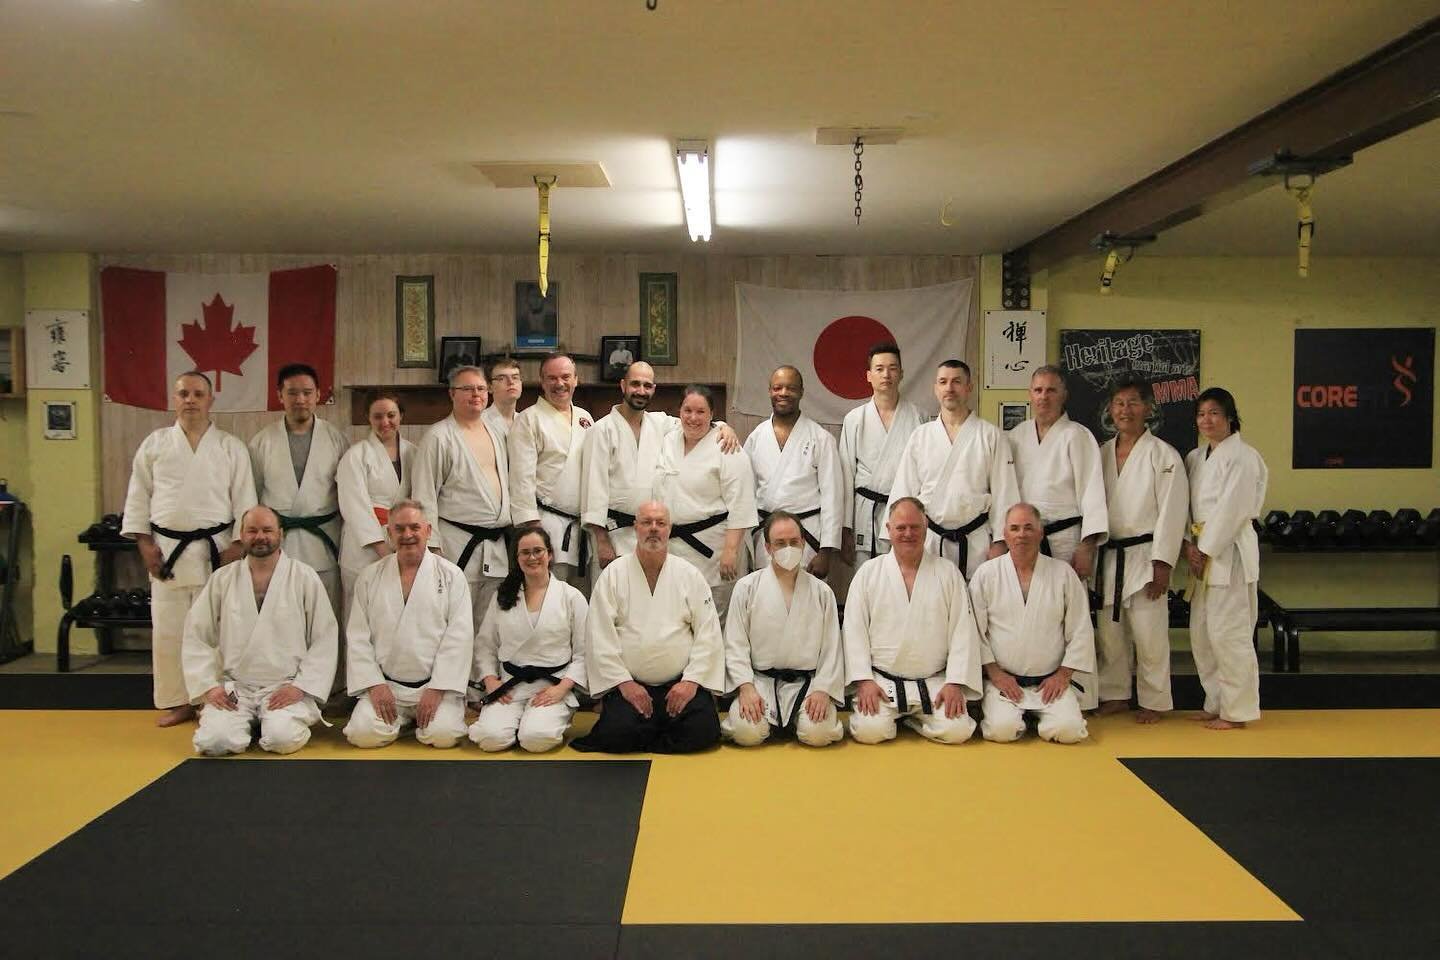 After 2 epic days at the Toronto Aikido Centre we are continuing our grand opening seminar with Robert Mustard Shihan at our dojo in Kitchener. We completed another incredible day of learning from one of the top masters in Yoshinkan Aikido! 🙏 OSU!